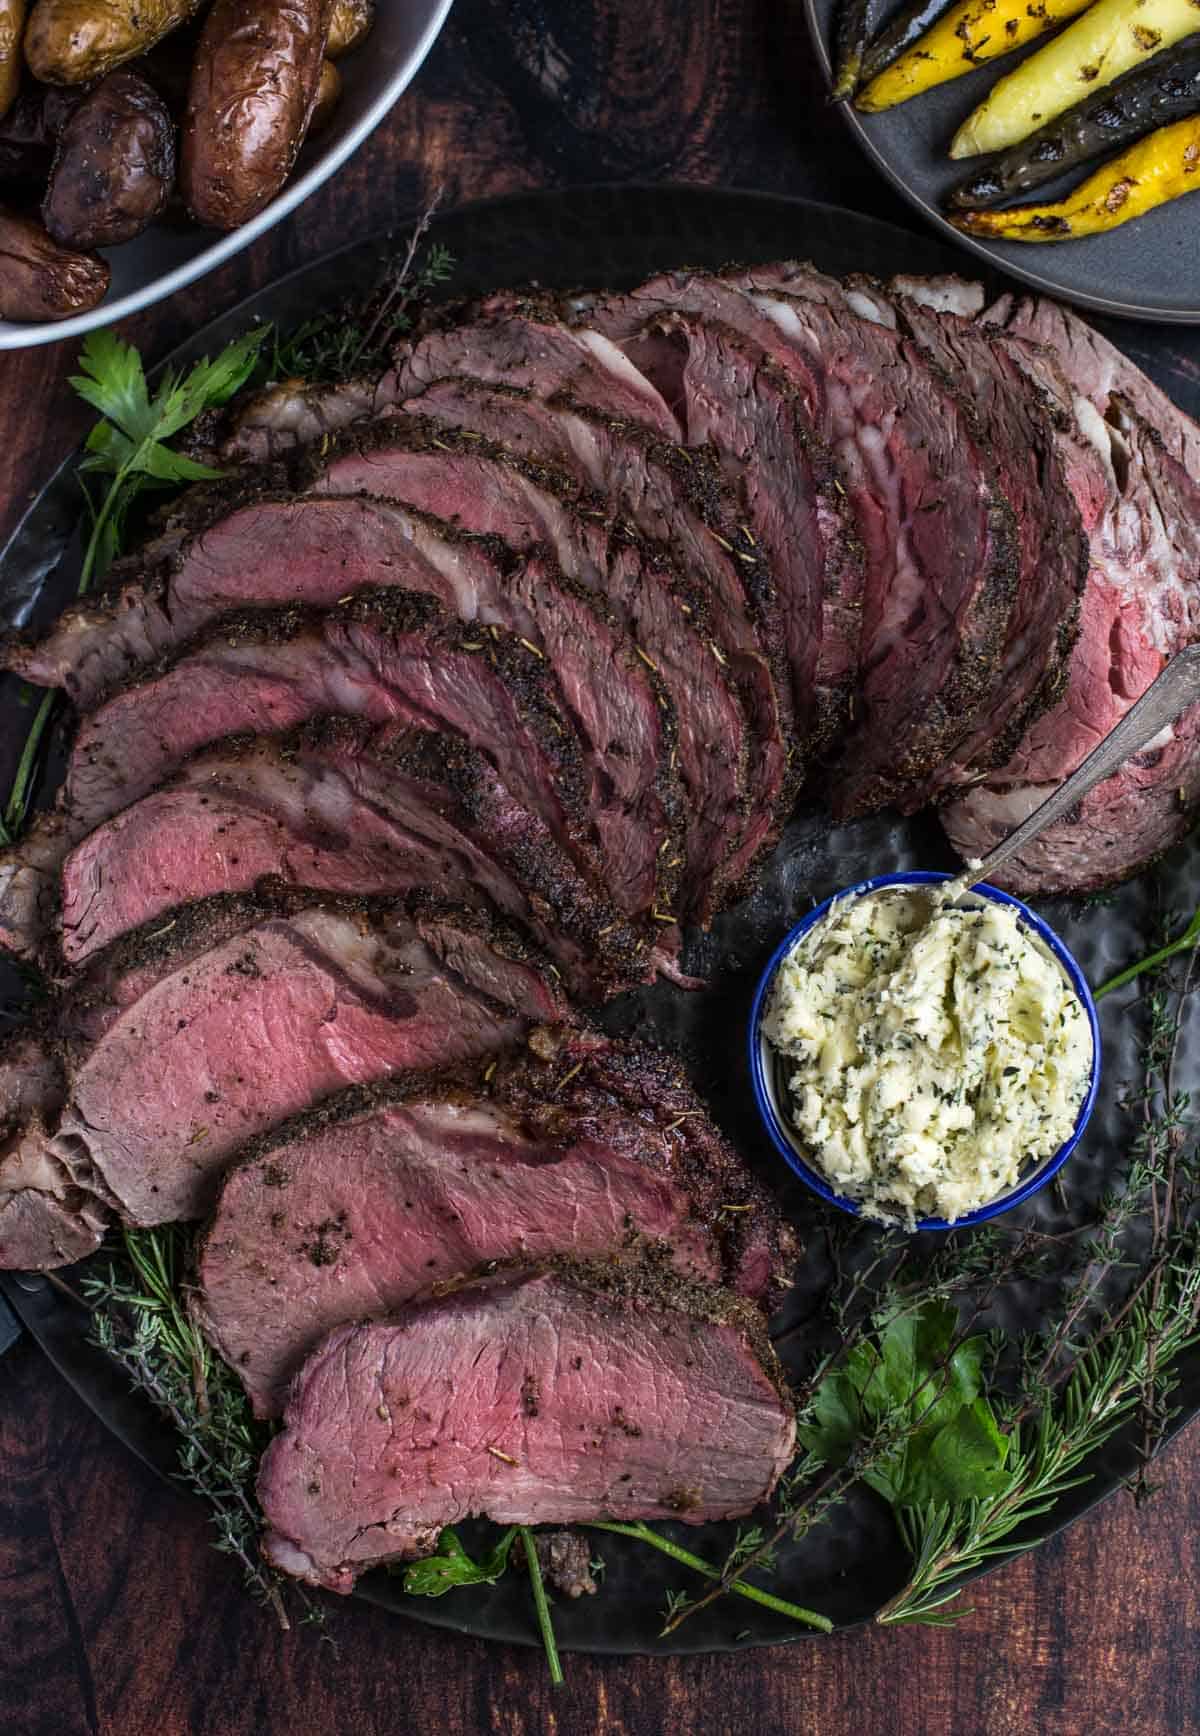 Slices of Grilled Prime Rib on a platter with a bowl of herb compound butter